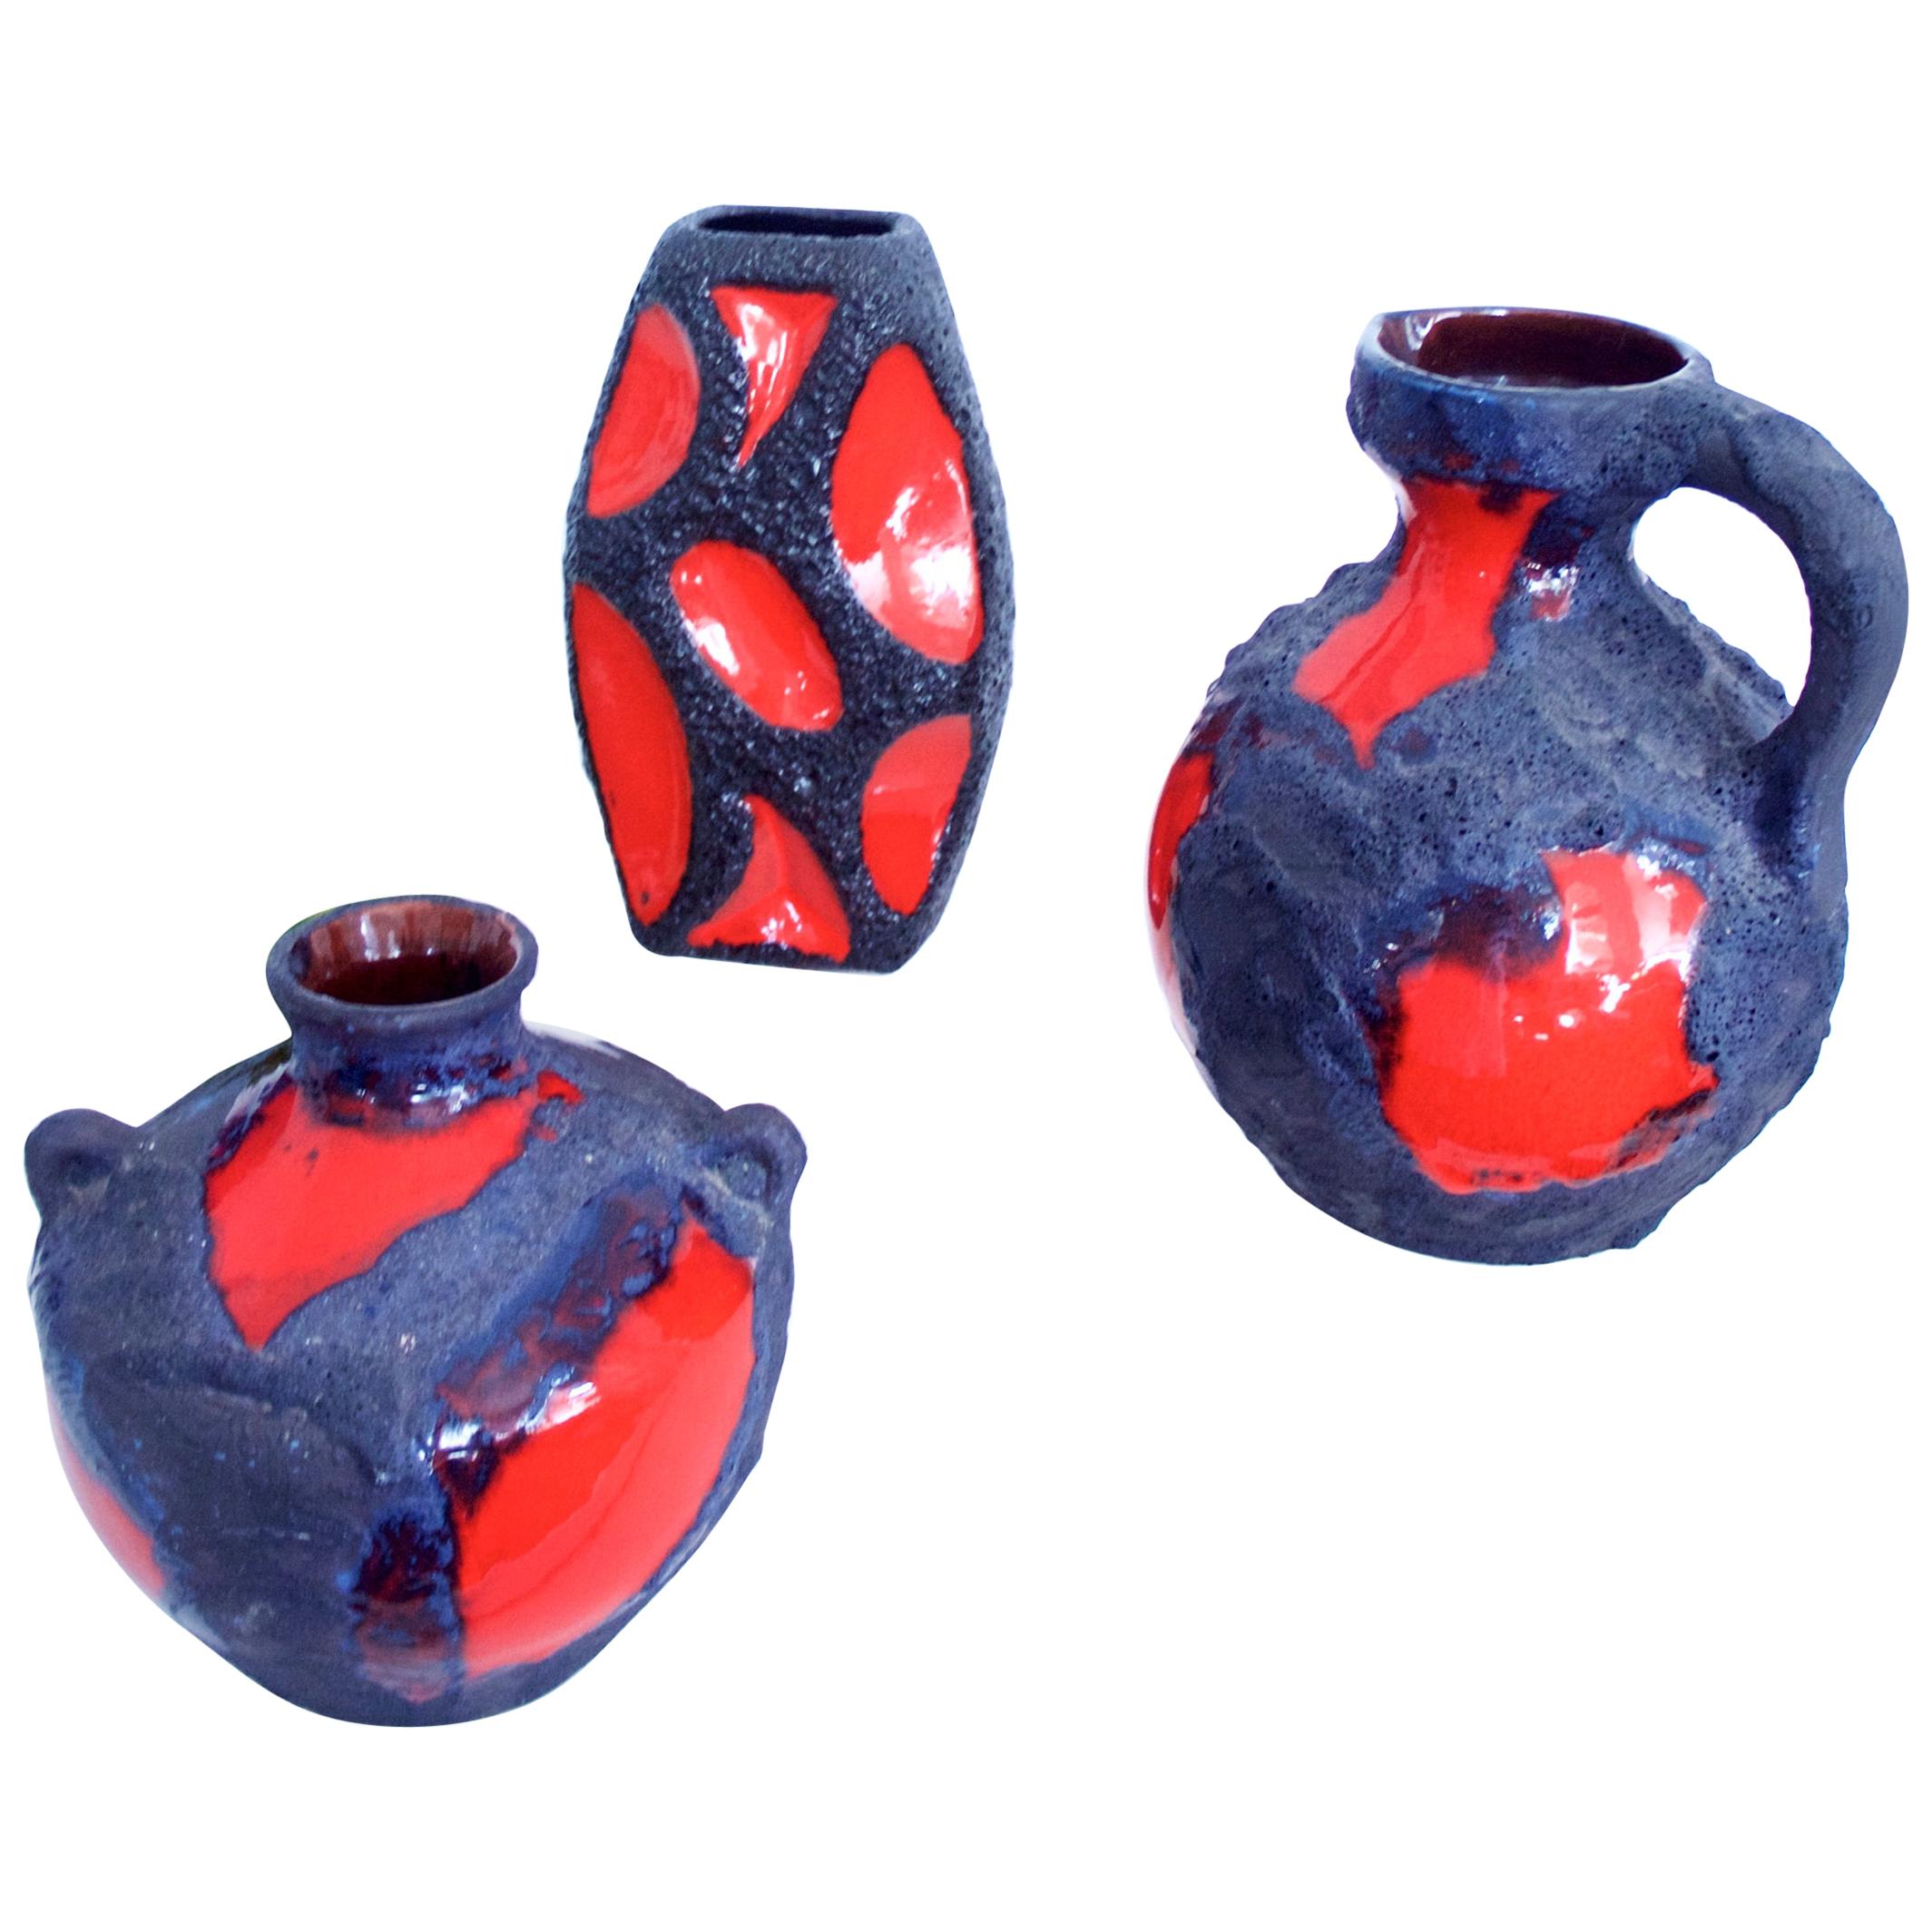 Modernist Fat Lava Space Age Collection of Ceramic Vases  by Roth/Marei 1970s For Sale